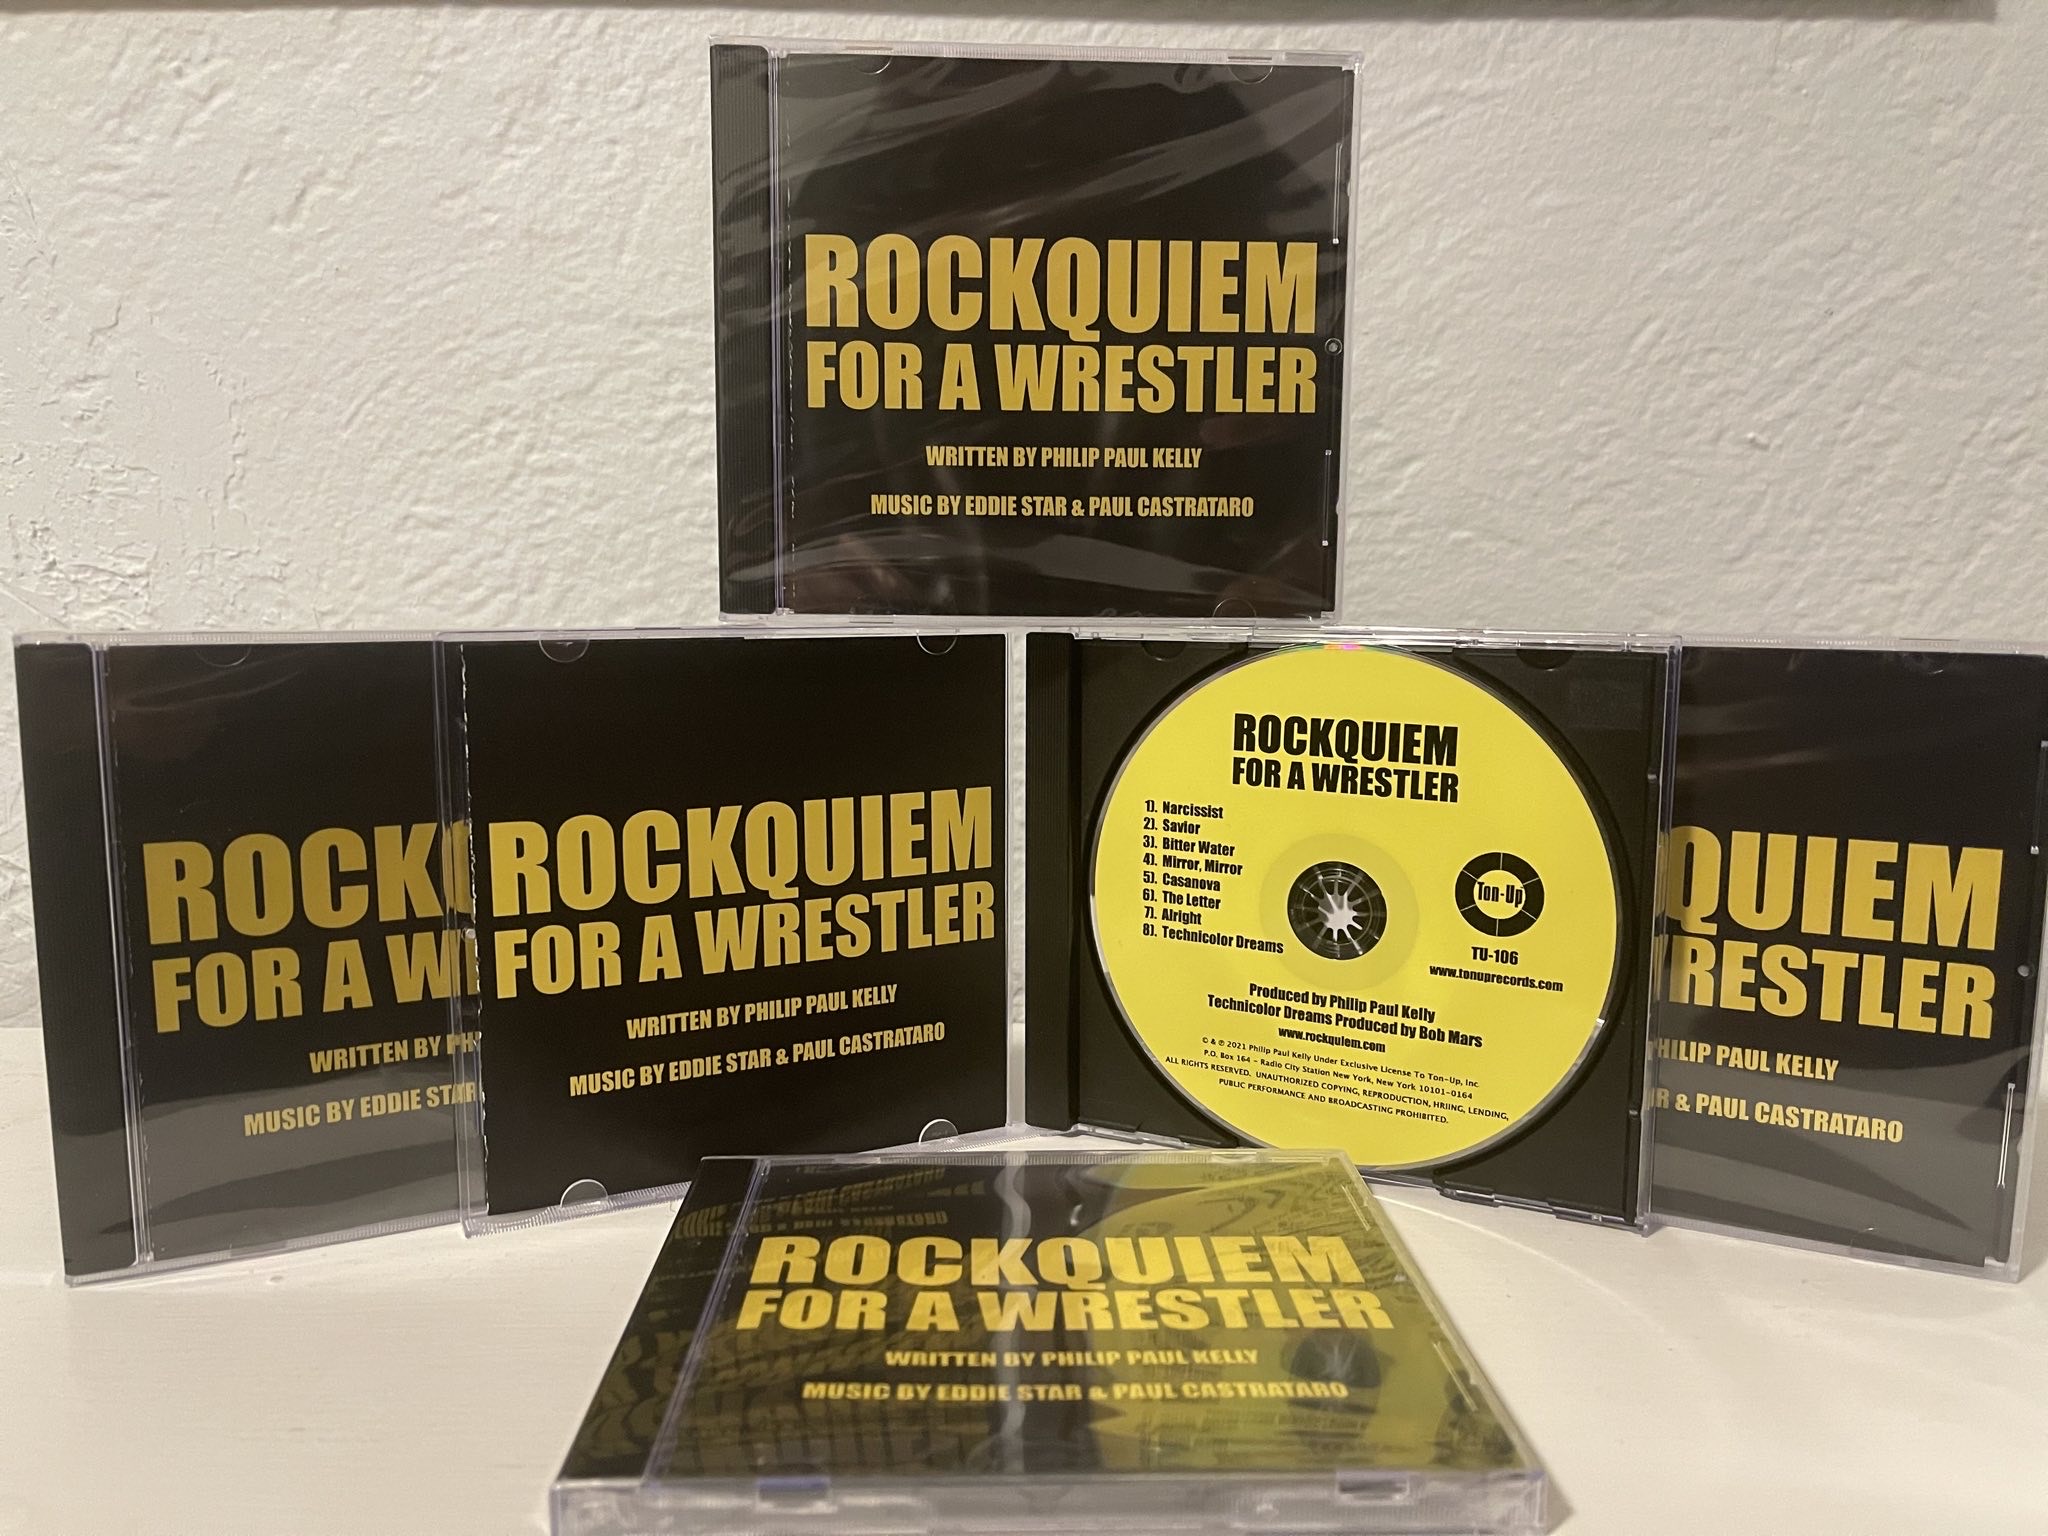 Ton-Up, Inc. is proud to announce the release of a live cast recording from the Rock-n-Roll Wrestling Spectacle, “Rockquiem For A Wrestler.” *The CD of a Live Cast Recording containing eight songs from the show, recorded at New York’s Triad Theater on June 27, 2020, was released on January 7, 2022.